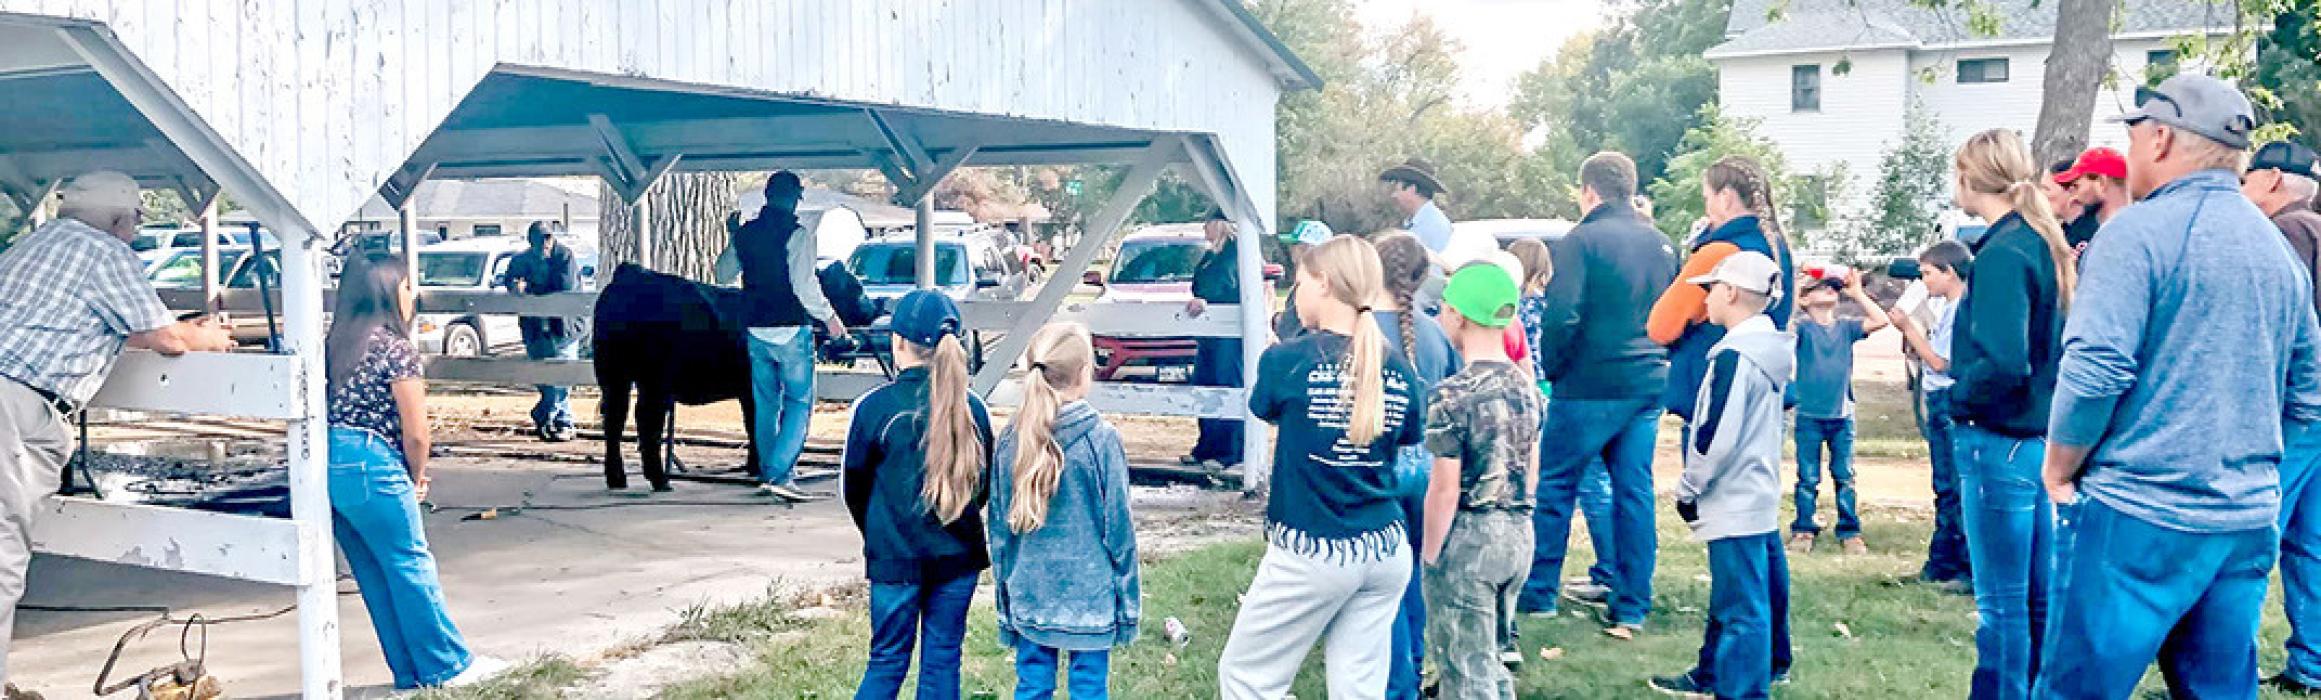 Gregory County 4-H hosts cattle care and clipping